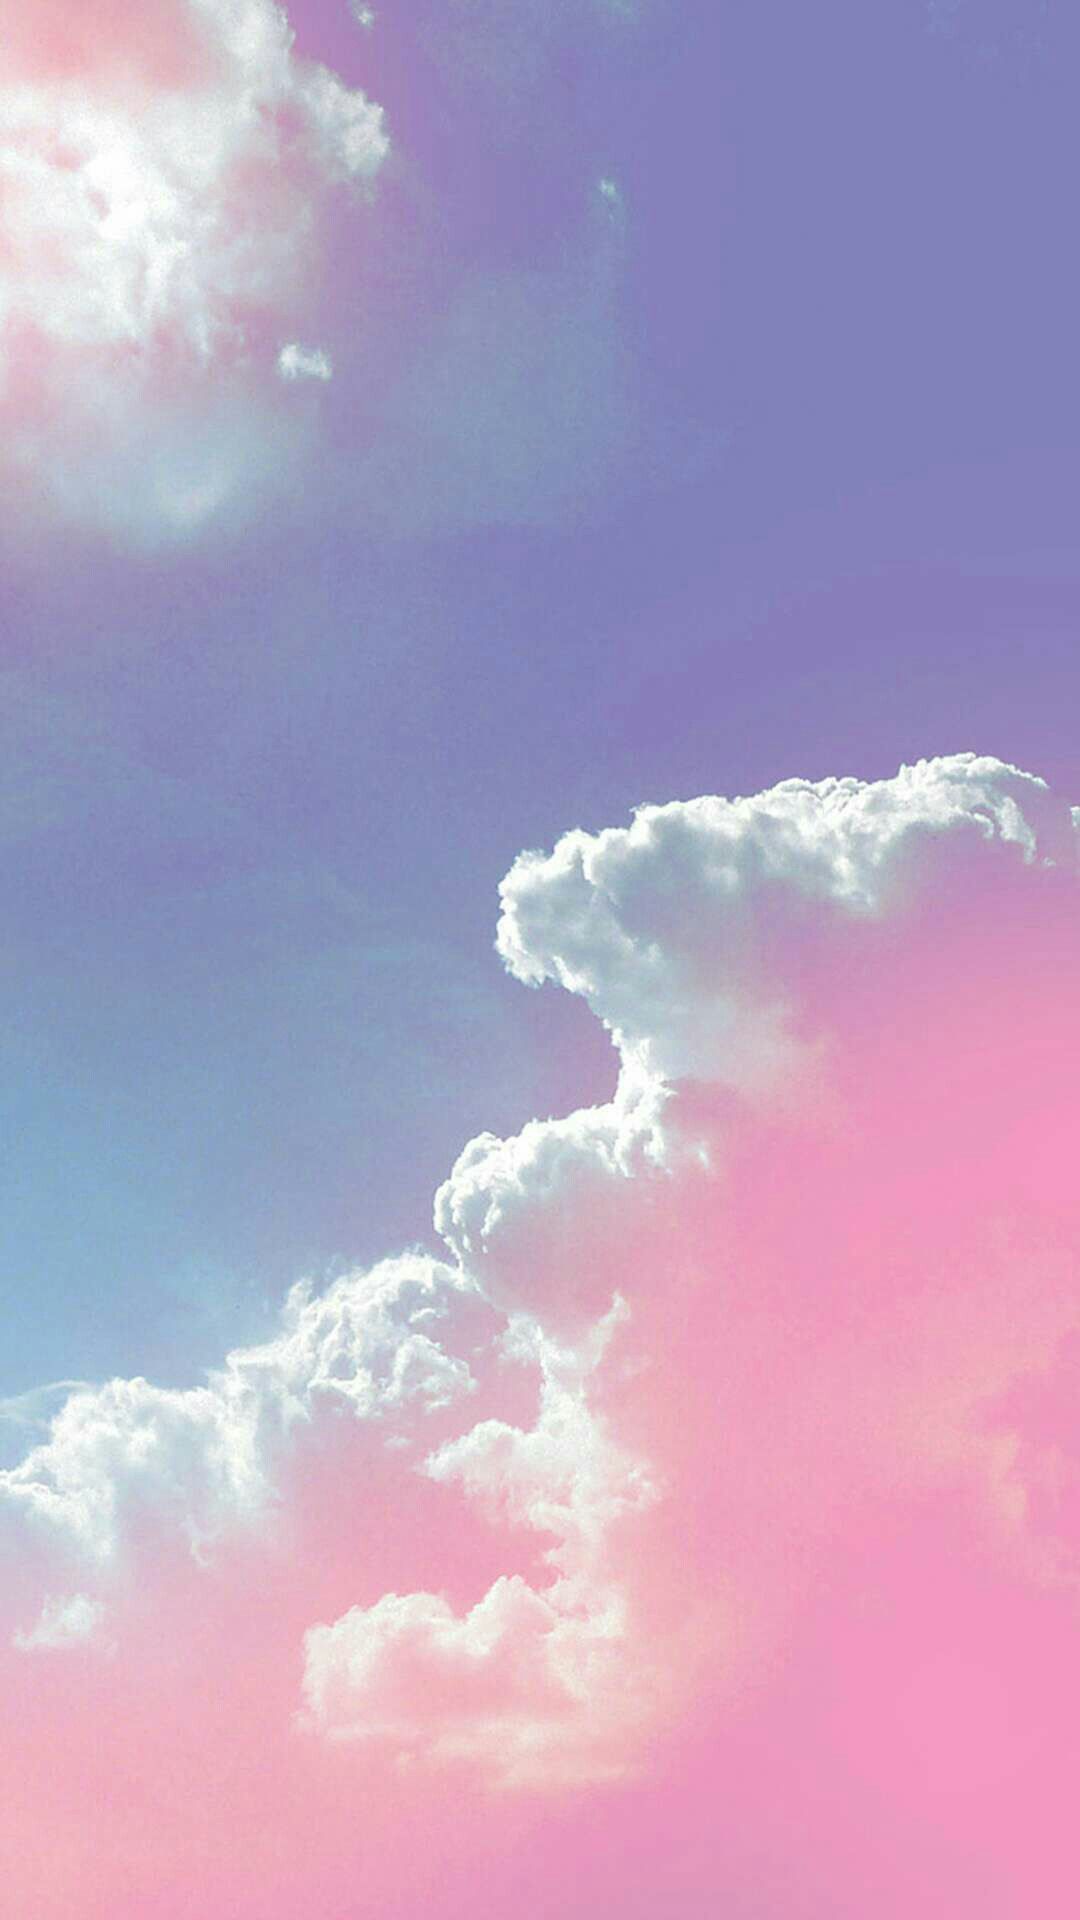 Aesthetic Pink And Blue Wallpaper. Clouds wallpaper iphone, Wallpaper pink and blue, Cloud wallpaper